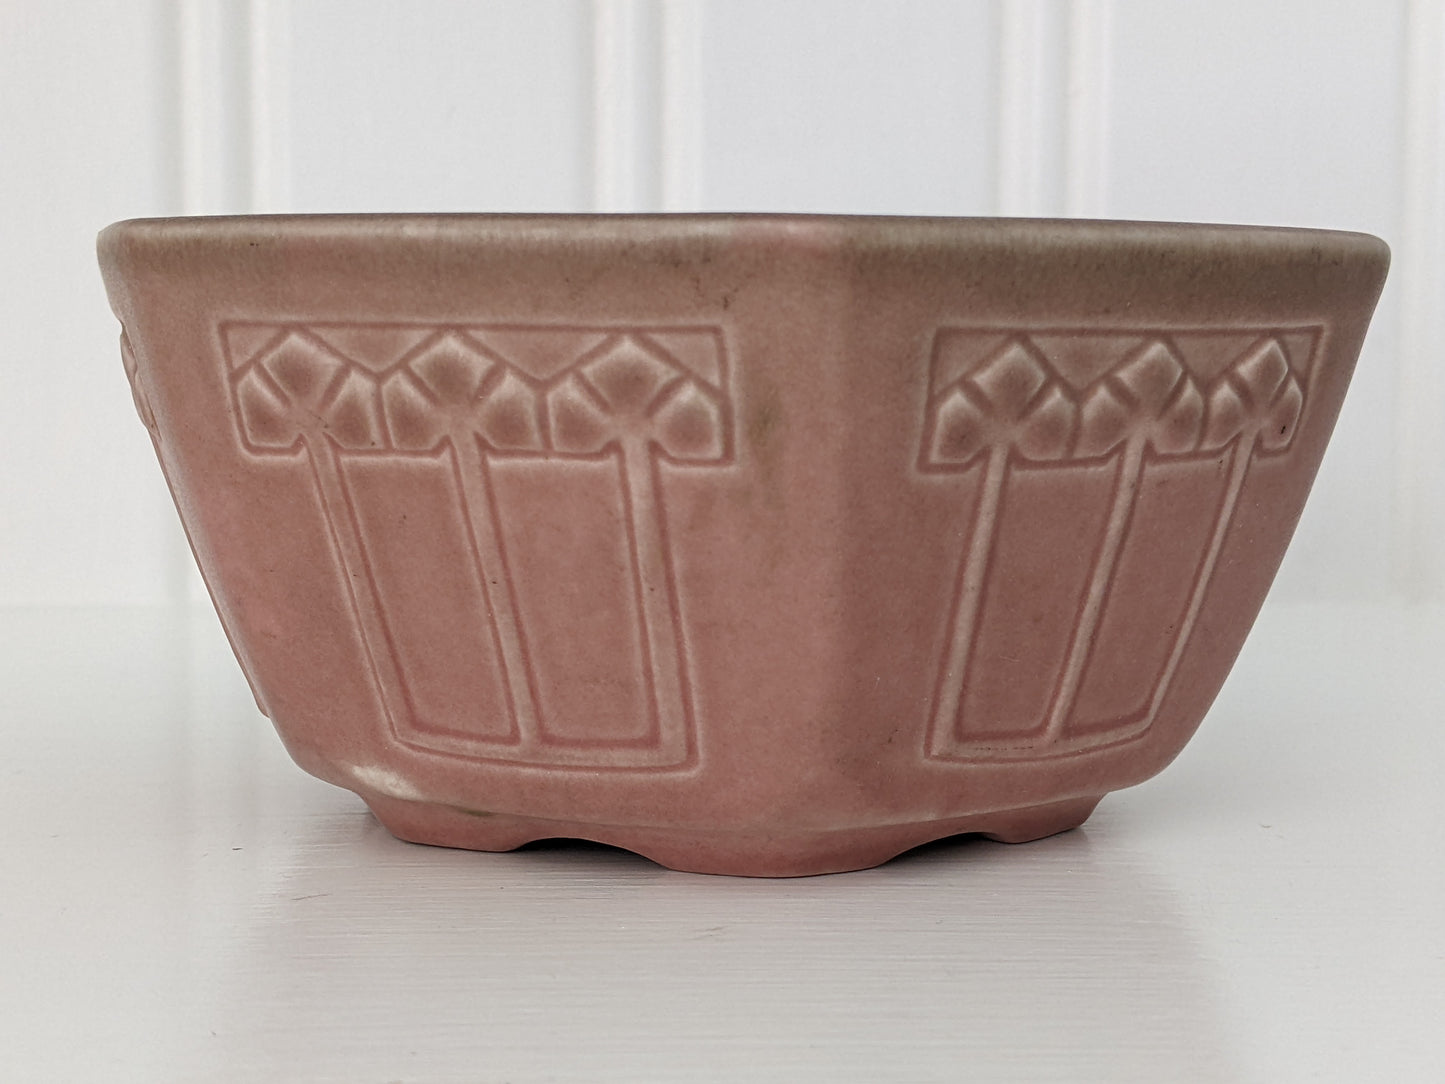 Antique Rookwood Pottery Planter No. 1770, Dated 1923